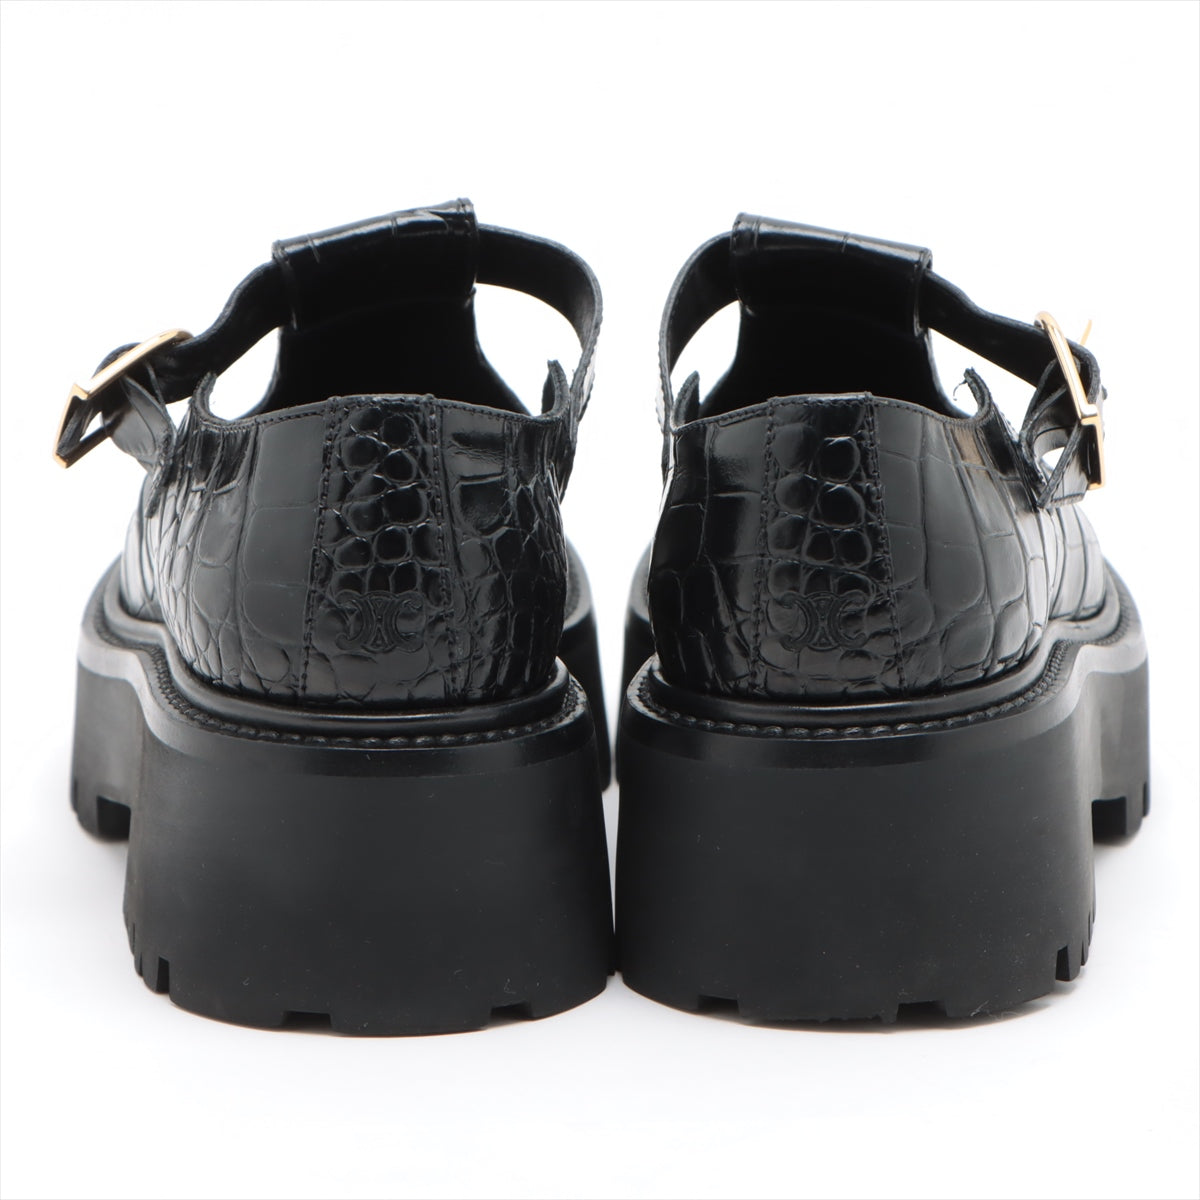 CELINE Triomphe Leather Leather shoes 36 Ladies' Black CP0232 bulky Perforated Babies Shoes